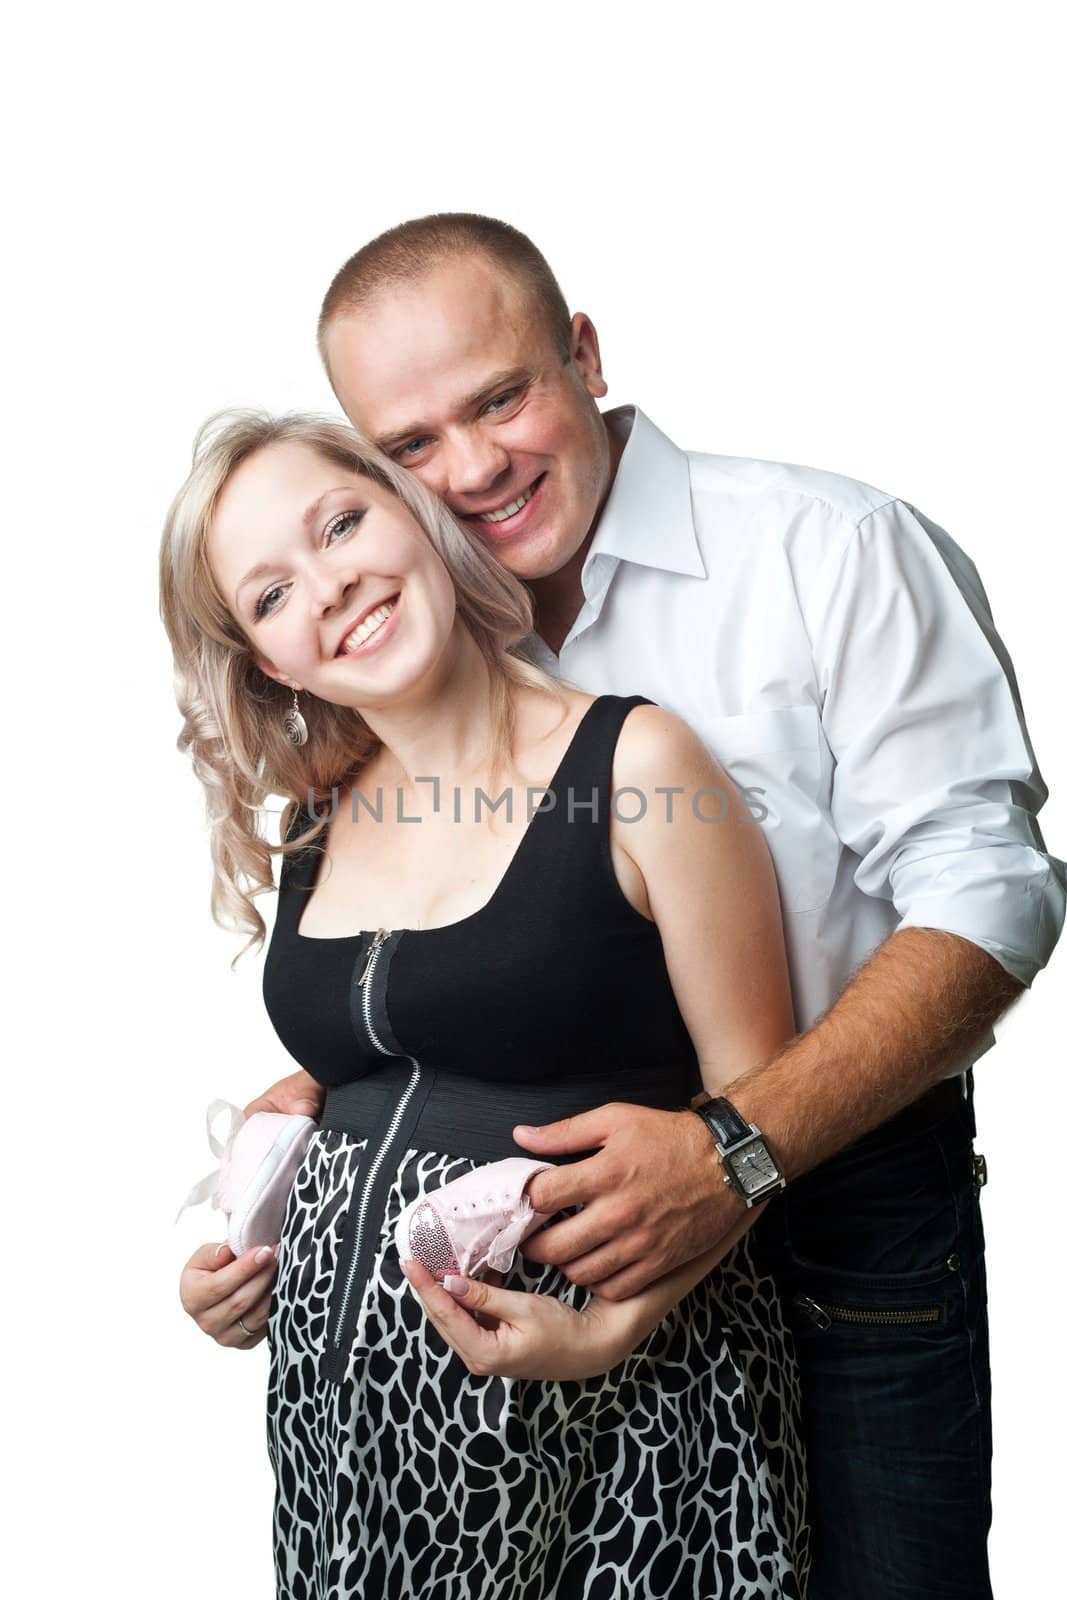 Smiled man and woman on white background